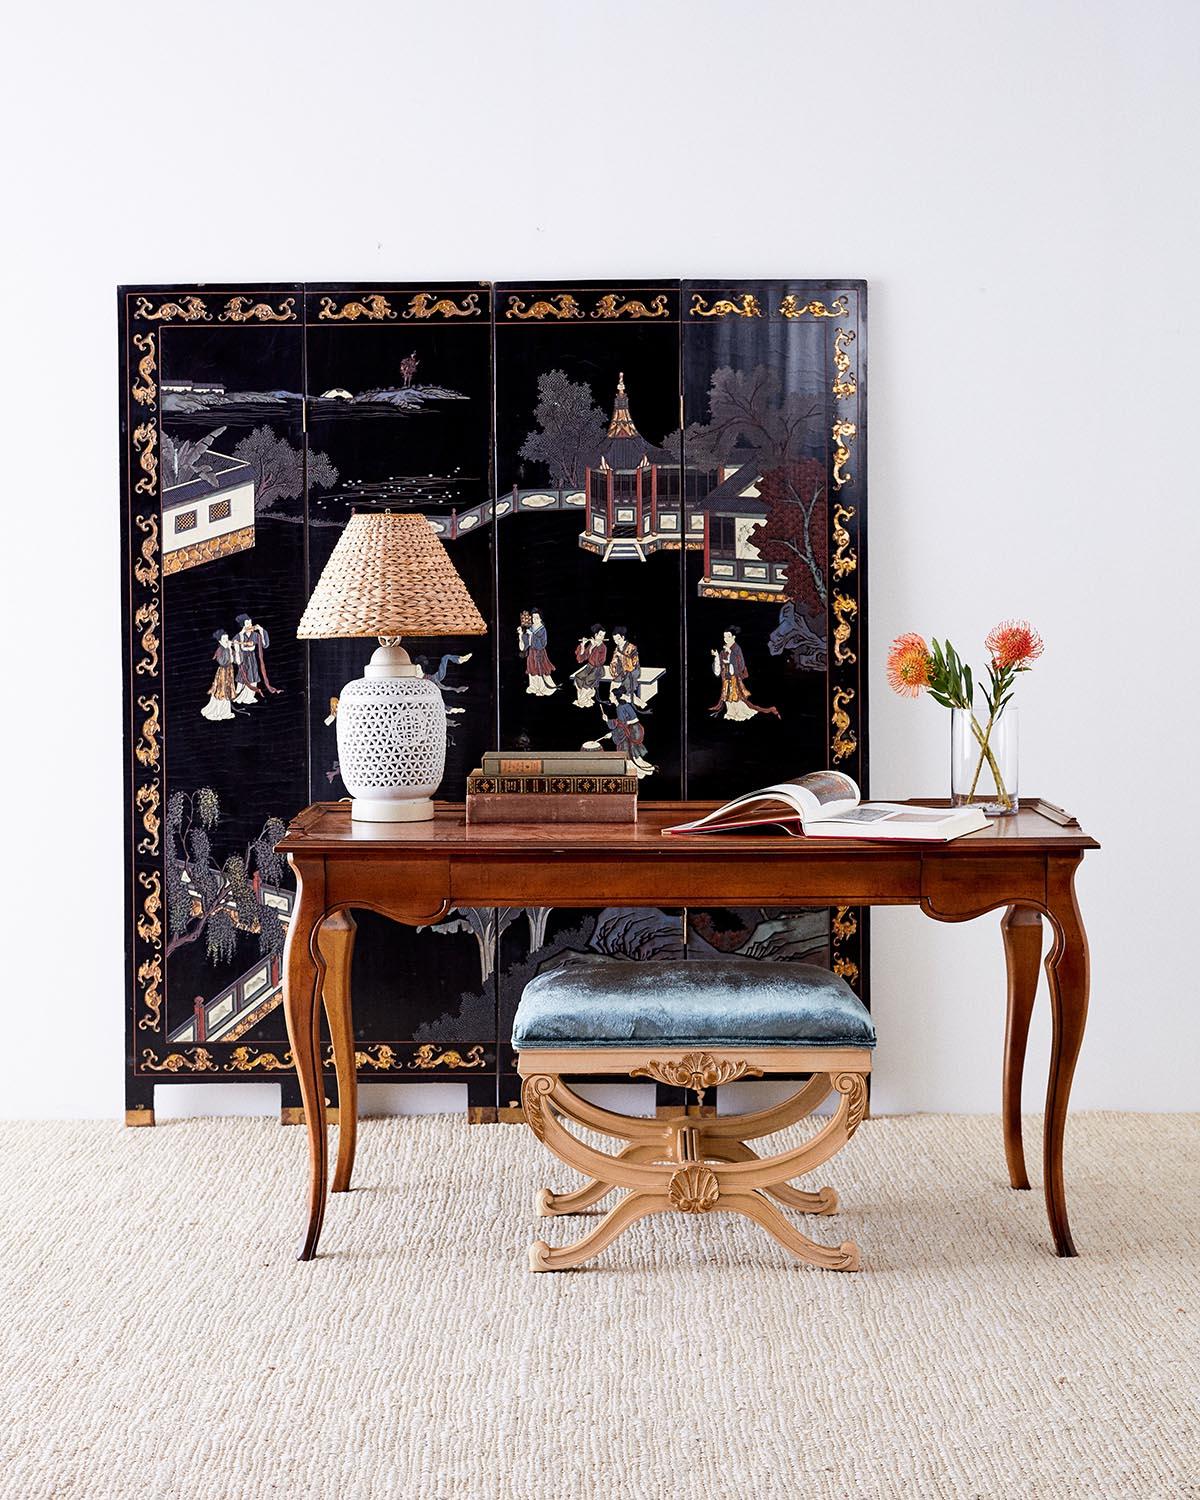 Elegant Chinese export four panel lacquered coromandel screen. Featuring a courtyard scene with musicians and dancers amid pagodas. The figures are dressed in brightly colored robes that are showcased against the black ground. The front panels are